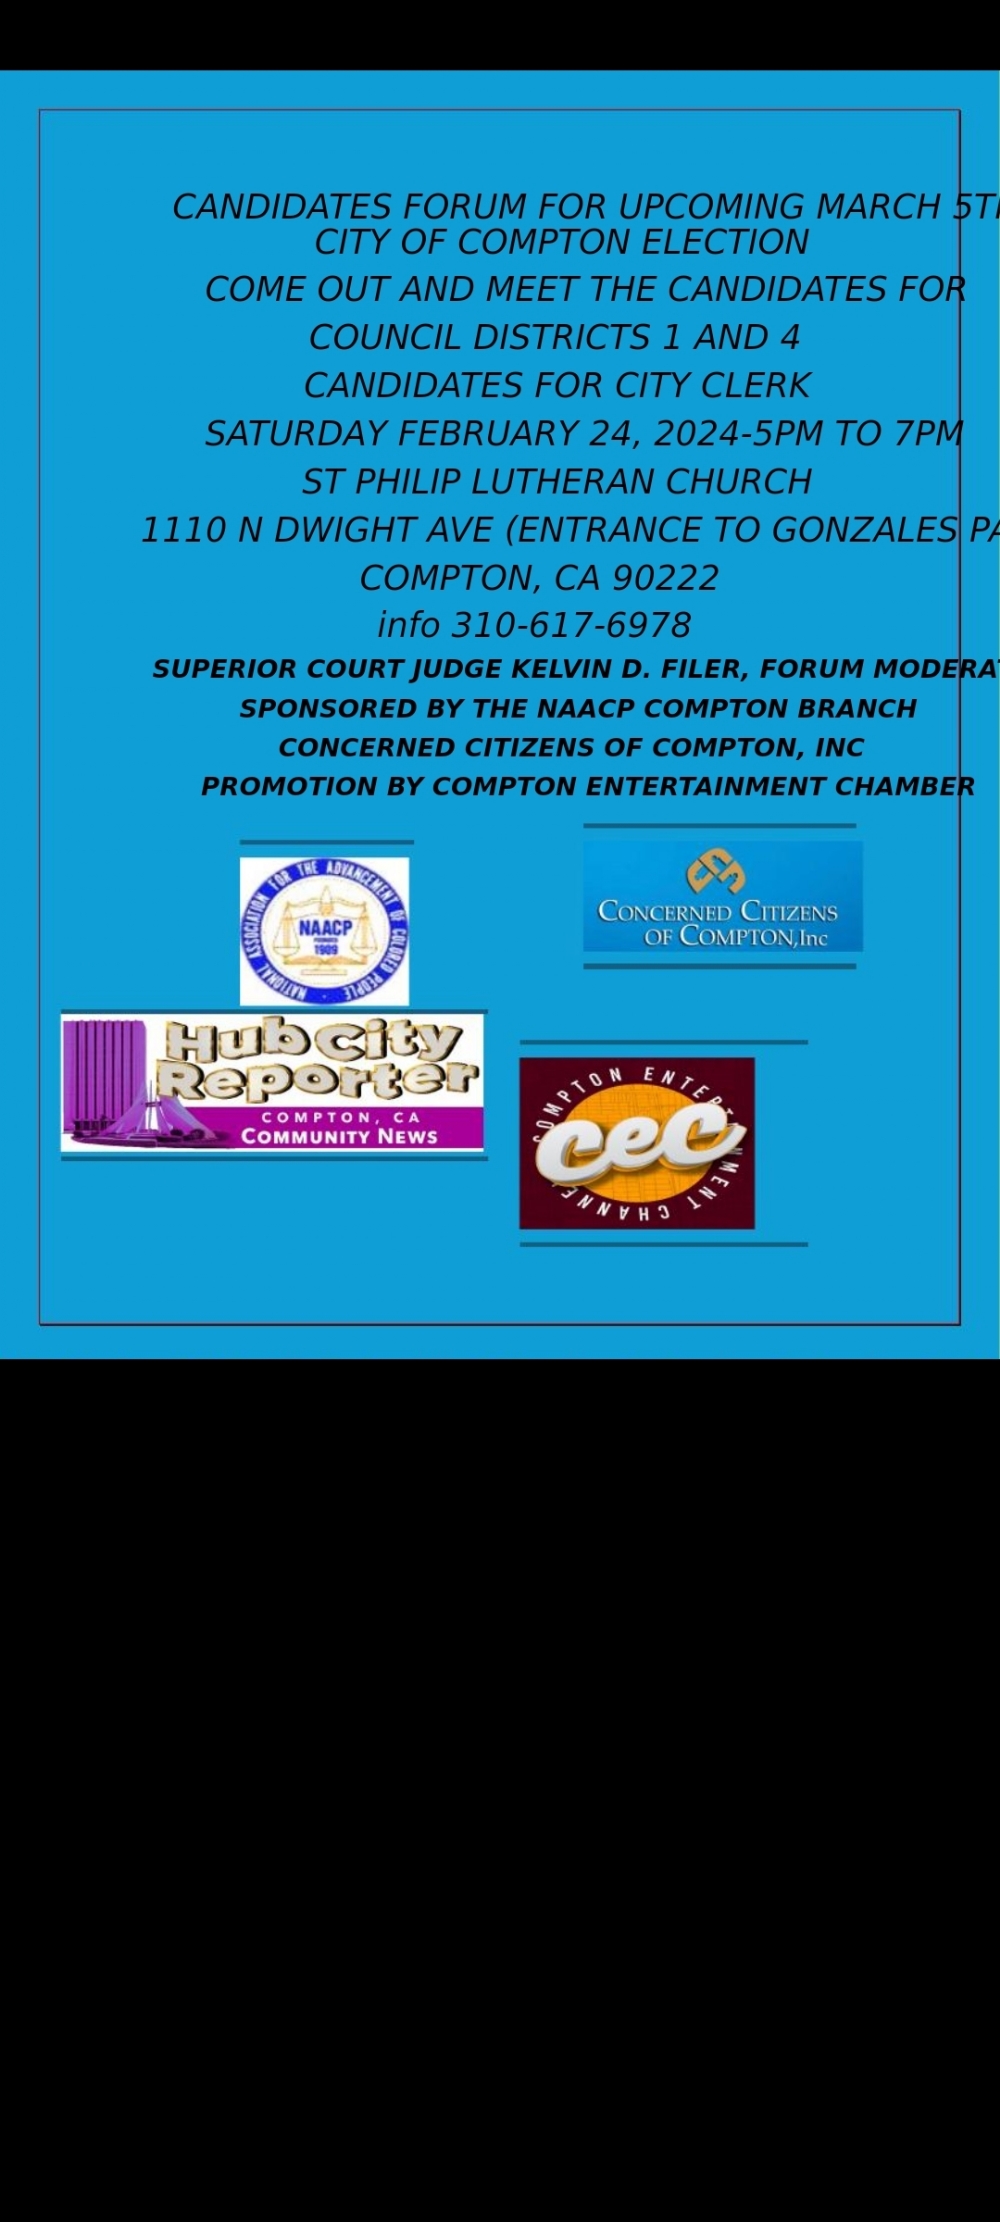 Watch The Compton Candidates Forum On The Compton Entertainment Channel